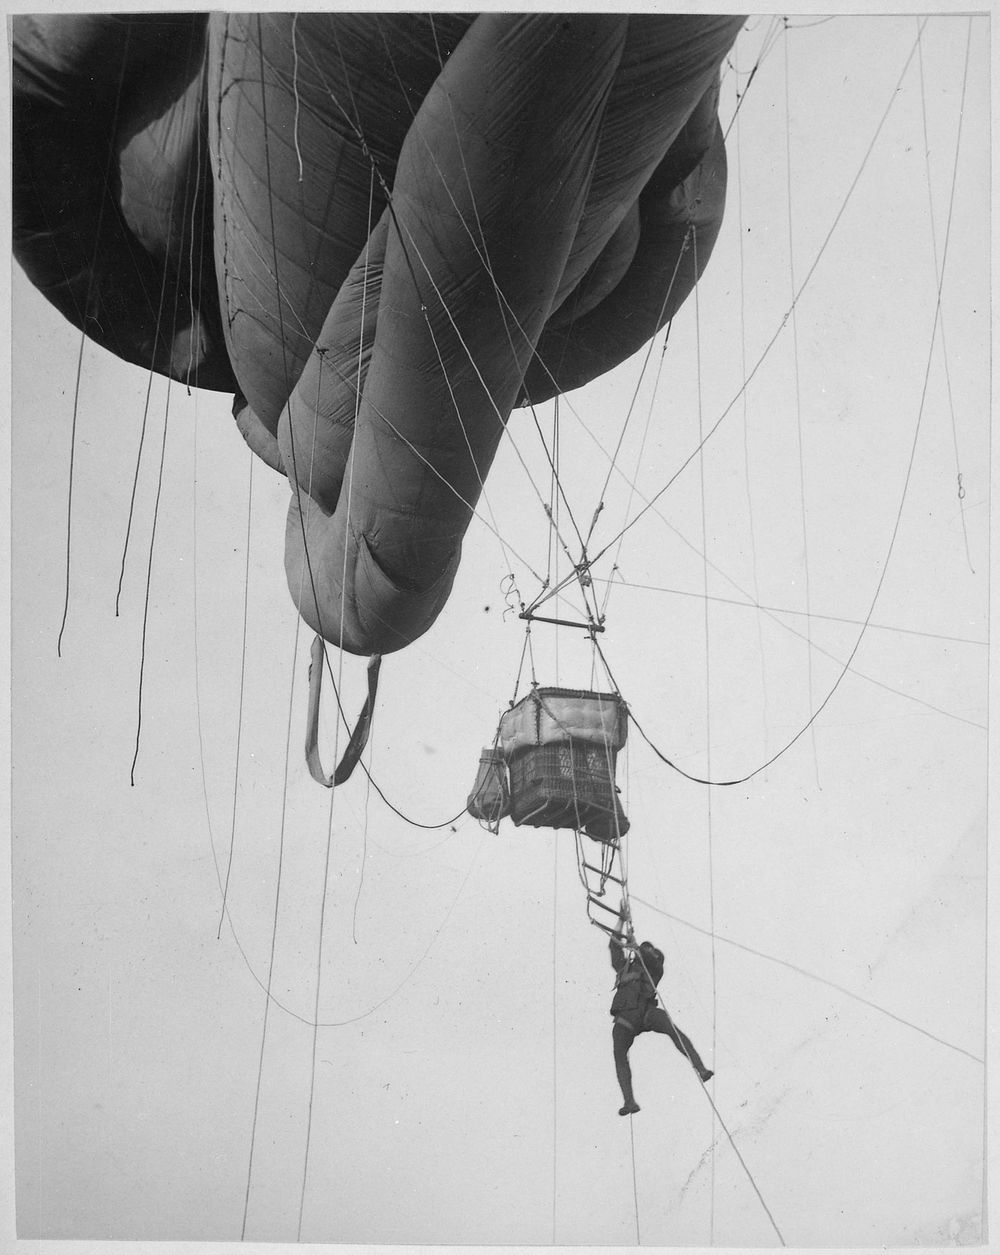 Returning from a U-Boat scouting party. Aerial naval observer coming down from a "Blimp" type balloon after a scouting tour…